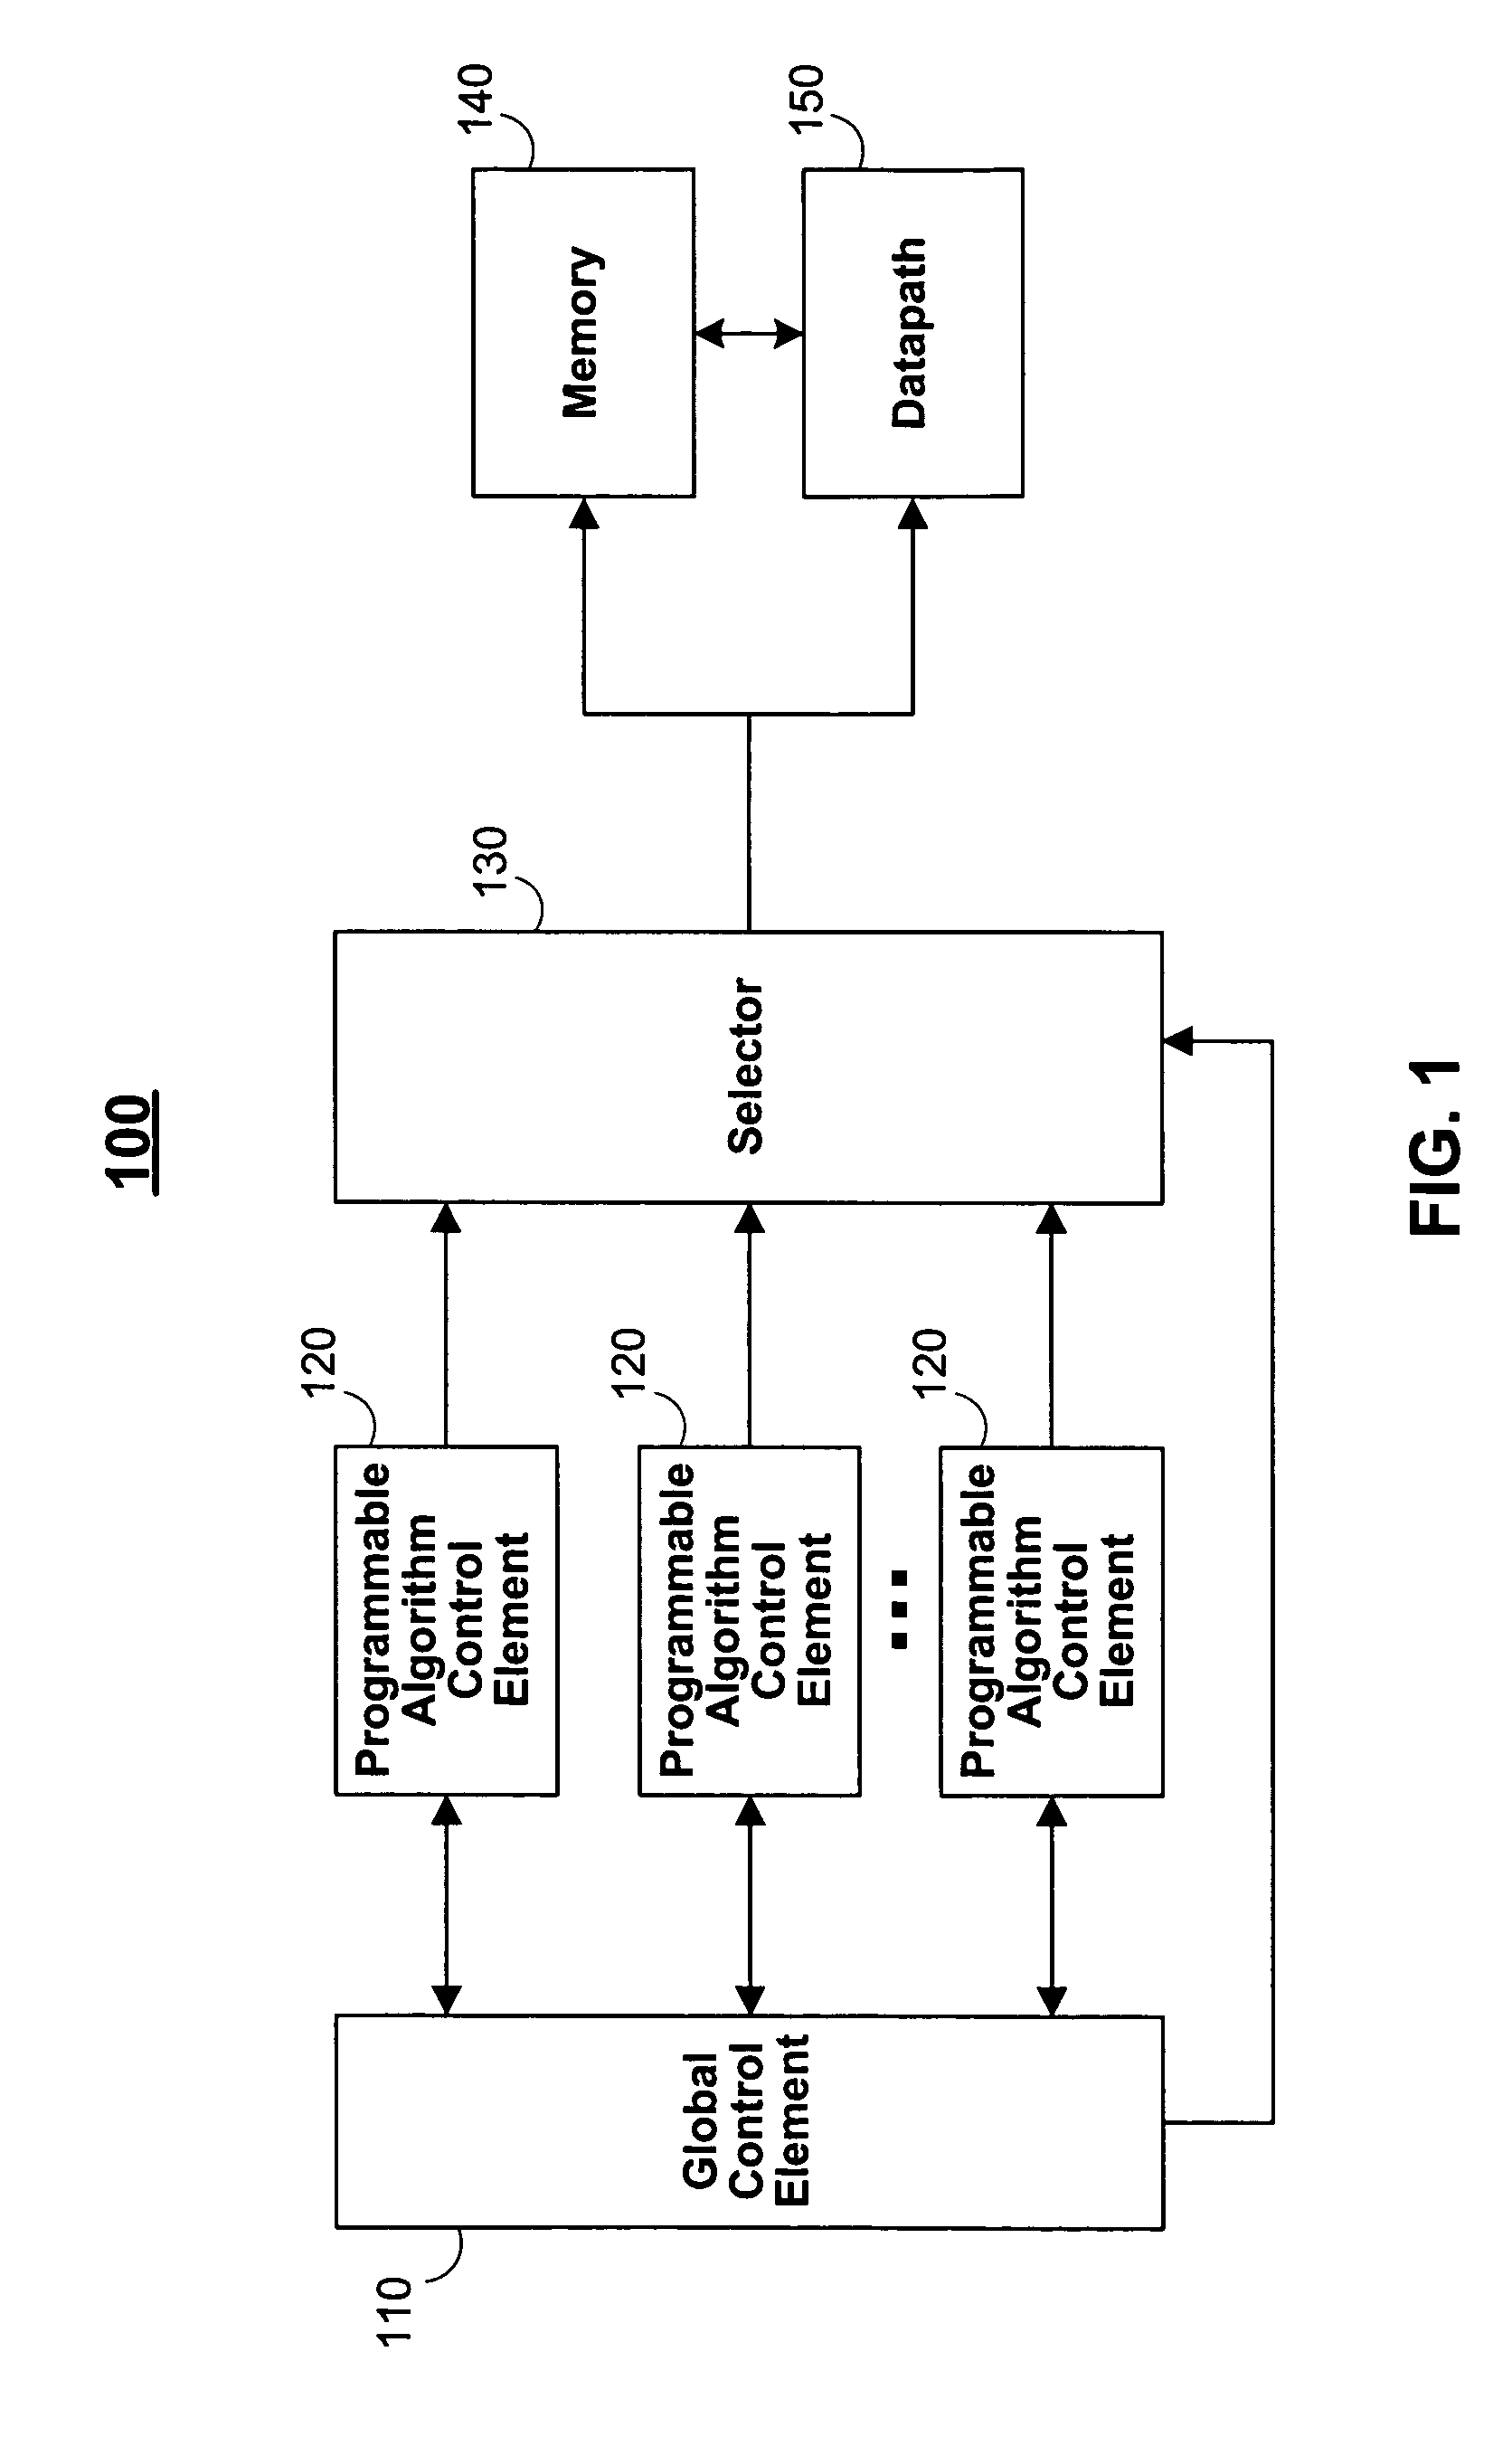 Programmable architecture for digital communication systems that support vector processing and the associated methodology